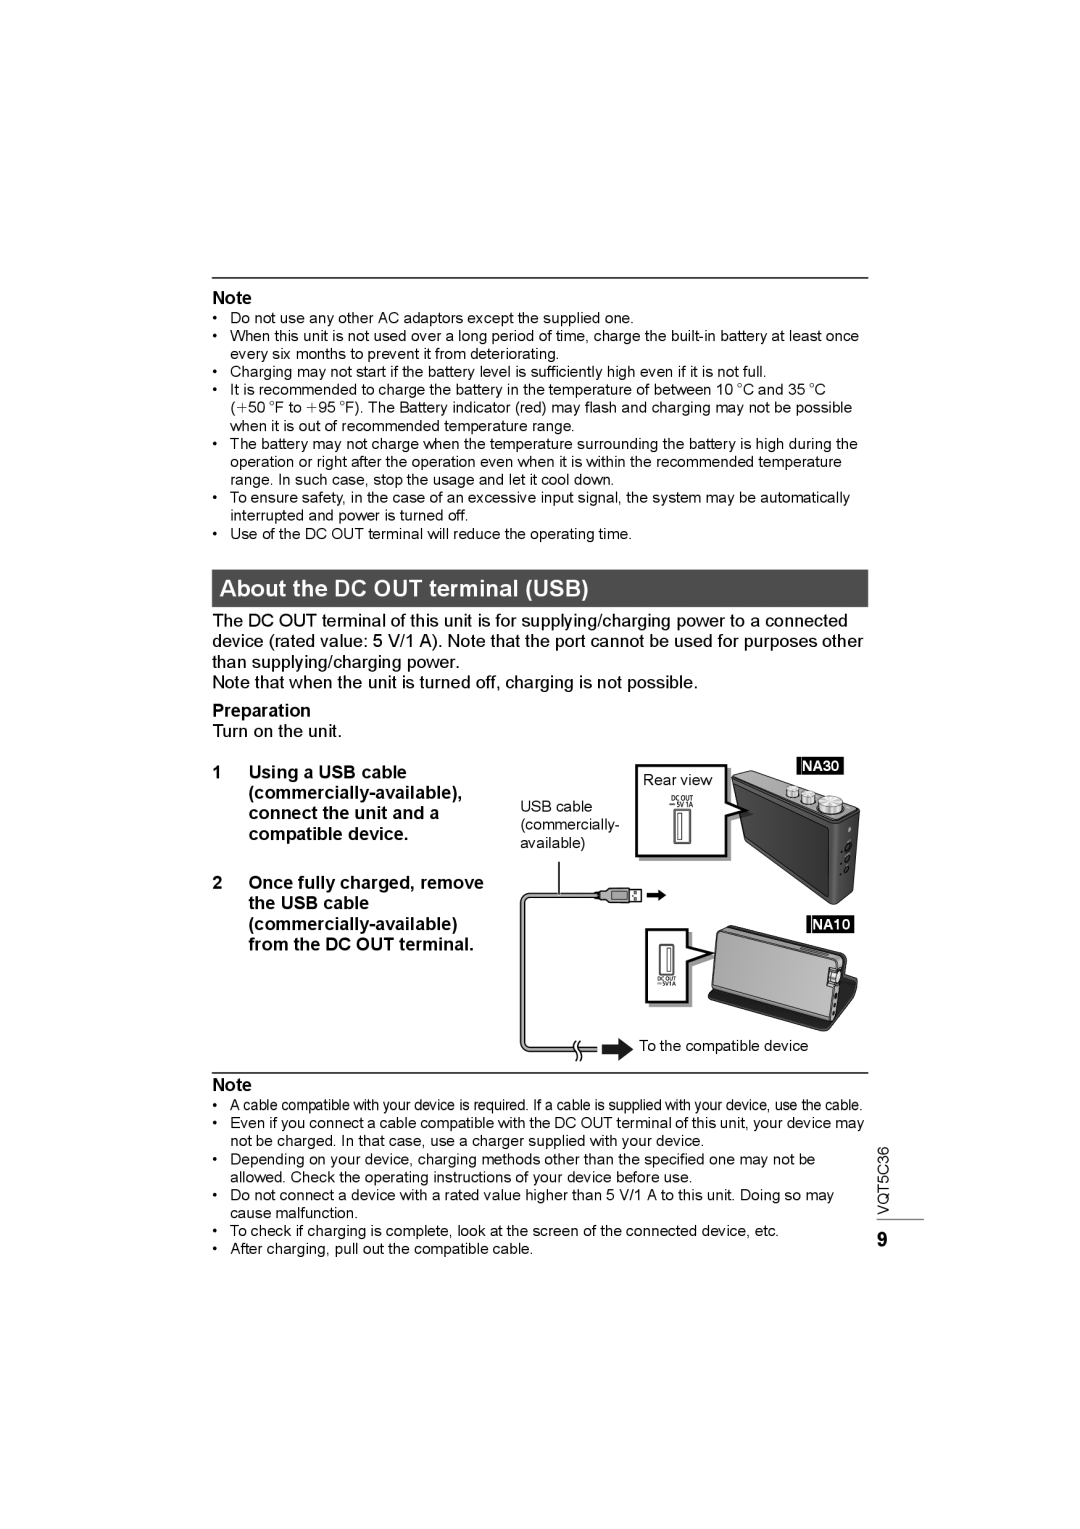 Panasonic SC-NA30 owner manual About the DC OUT terminal USB, Preparation 